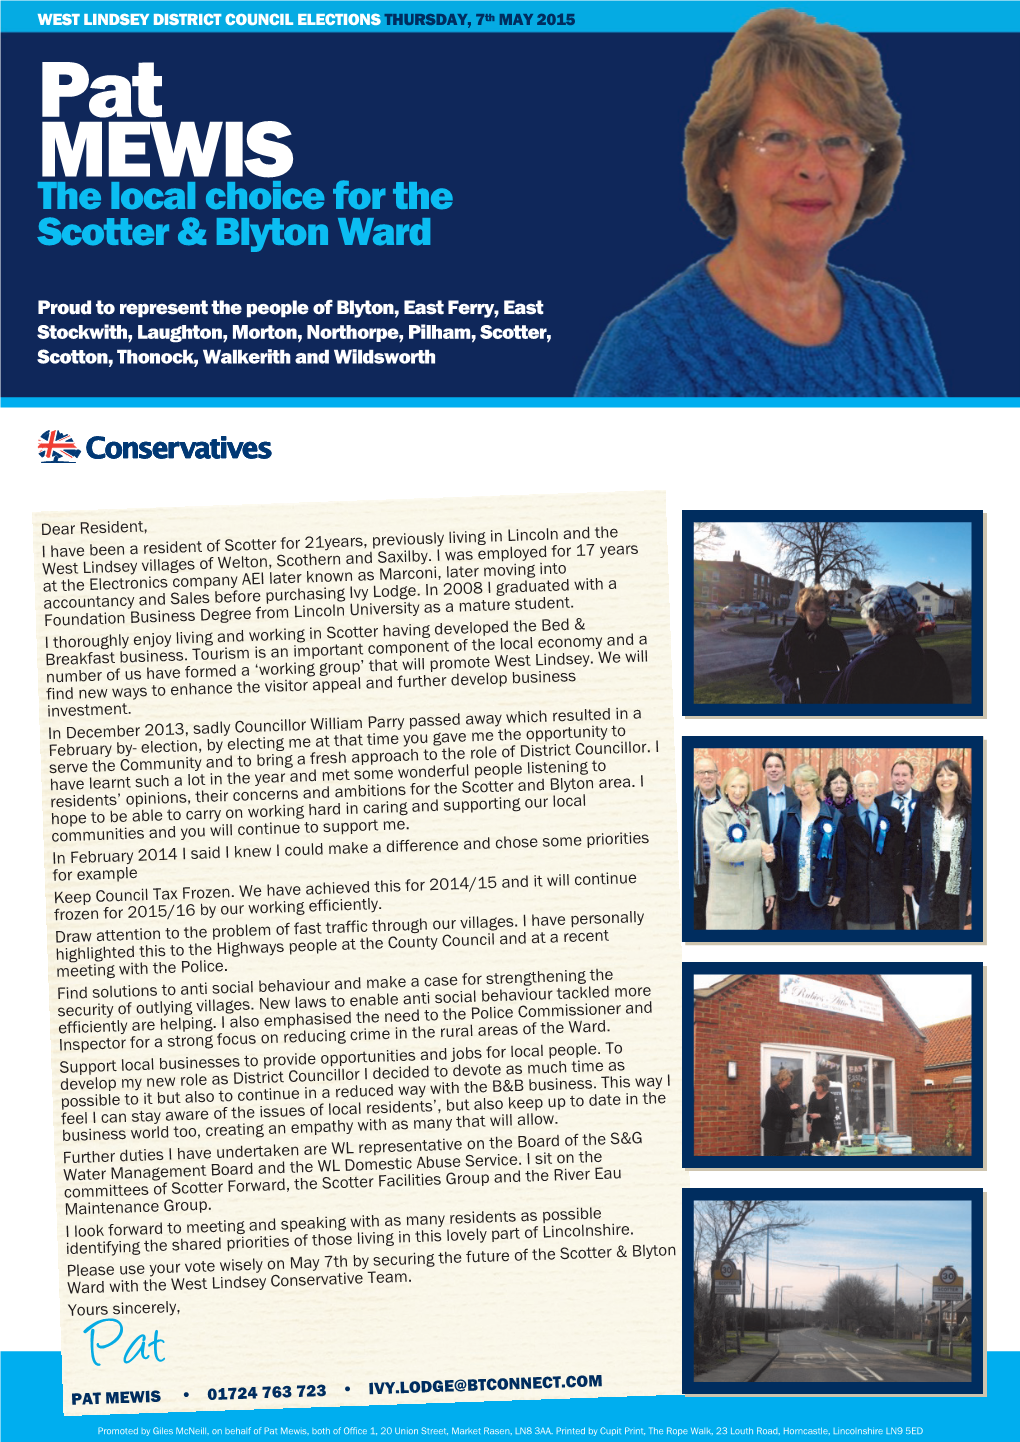 Pat MEWIS the Local Choice for the Scotter & Blyton Ward